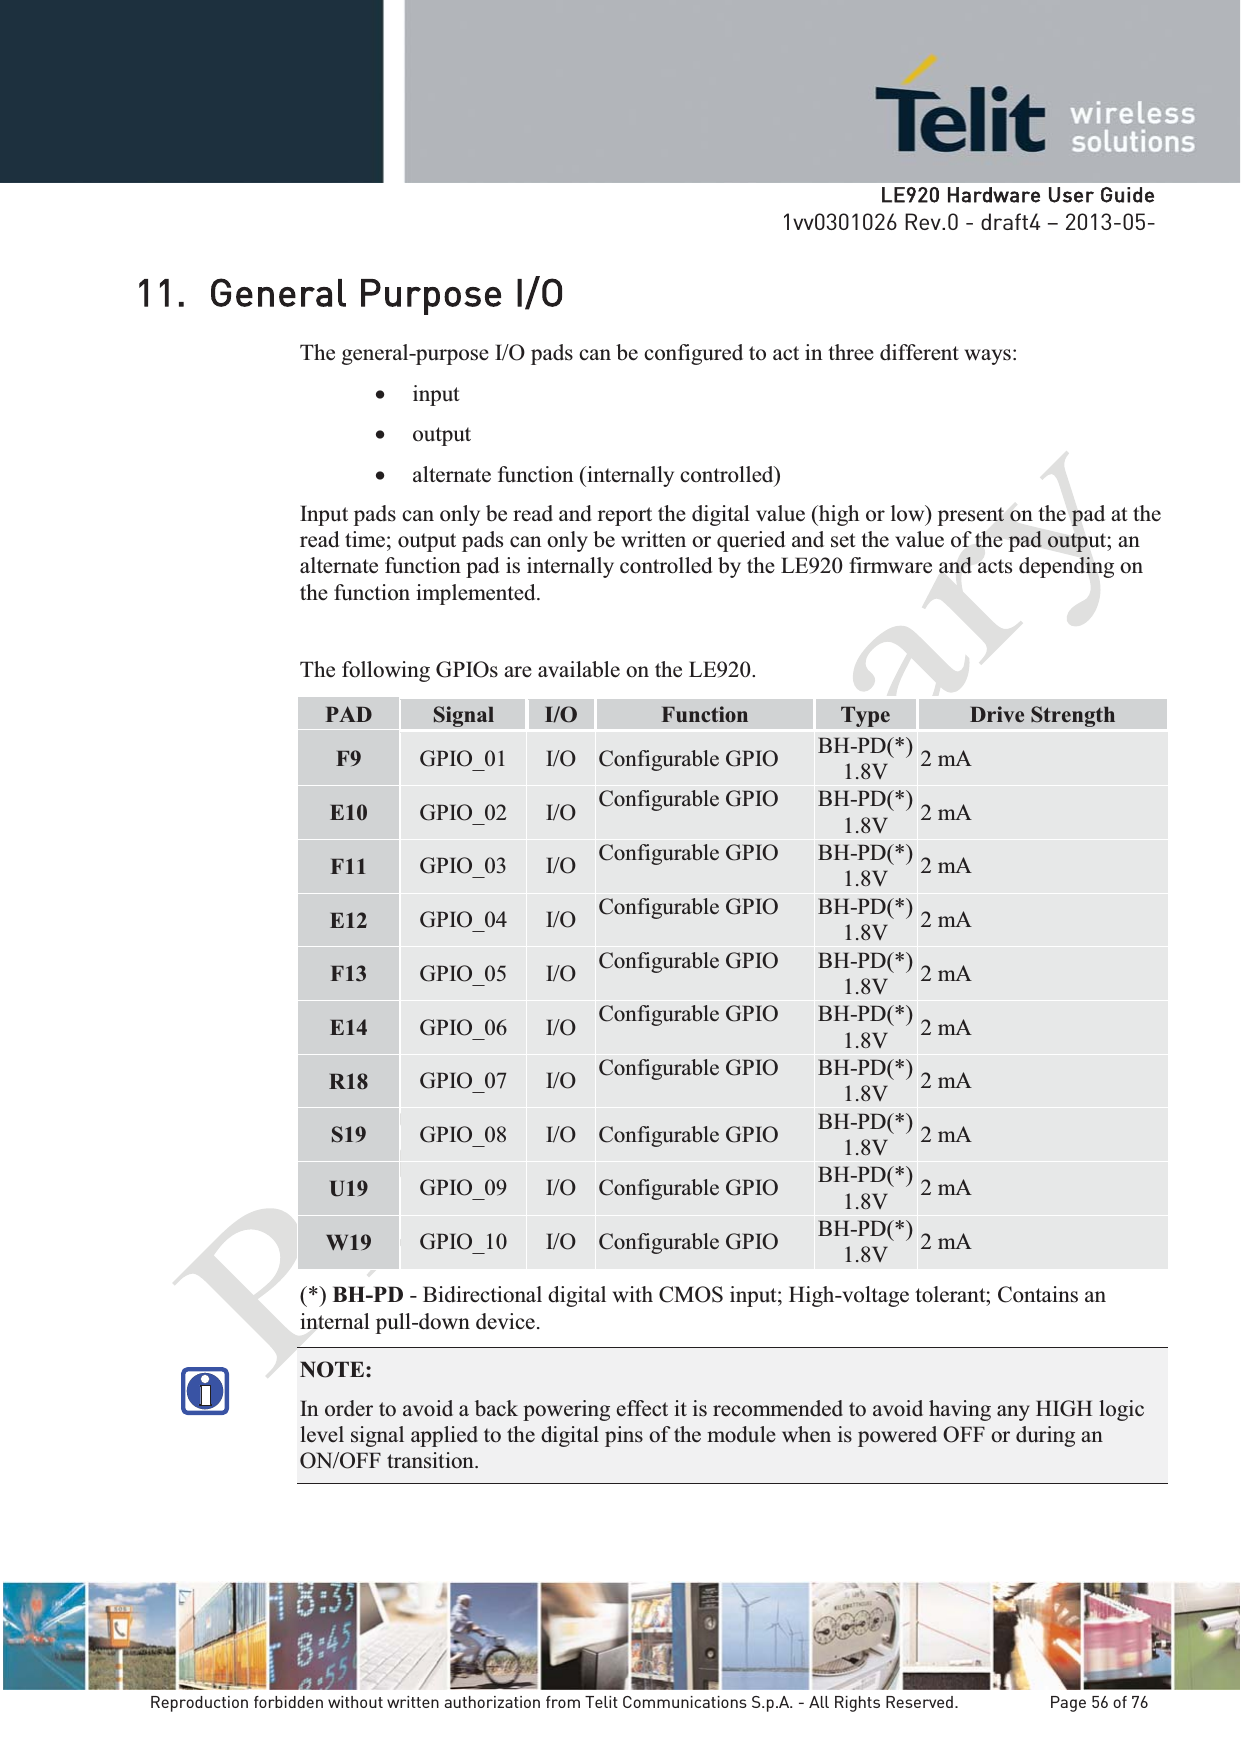   LLE920 Hardware User Guide1vv0301026 Rev.0 - draft4 – 2013-05-Reproduction forbidden without written authorization from Telit Communications S.p.A. - All Rights Reserved.    Page 56 of 76 11. General Purpose I/O The general-purpose I/O pads can be configured to act in three different ways: x input x output x alternate function (internally controlled) Input pads can only be read and report the digital value (high or low) present on the pad at the read time; output pads can only be written or queried and set the value of the pad output; an alternate function pad is internally controlled by the LE920 firmware and acts depending on the function implemented.  The following GPIOs are available on the LE920. PAD  Signal  I/O  Function  Type  Drive Strength F9  GPIO_01  I/O  Configurable GPIO  BH-PD(*) 1.8V  2 mA E10  GPIO_02  I/O  Configurable GPIO  BH-PD(*) 1.8V  2 mA F11  GPIO_03  I/O  Configurable GPIO  BH-PD(*) 1.8V  2 mA E12  GPIO_04  I/O  Configurable GPIO  BH-PD(*) 1.8V  2 mA F13  GPIO_05  I/O  Configurable GPIO  BH-PD(*) 1.8V  2 mA E14  GPIO_06  I/O  Configurable GPIO  BH-PD(*) 1.8V  2 mA R18  GPIO_07  I/O  Configurable GPIO  BH-PD(*) 1.8V  2 mA S19  GPIO_08  I/O  Configurable GPIO  BH-PD(*) 1.8V  2 mA U19  GPIO_09  I/O  Configurable GPIO  BH-PD(*) 1.8V  2 mA W19 GPIO_10  I/O  Configurable GPIO  BH-PD(*) 1.8V  2 mA (*) BH-PD - Bidirectional digital with CMOS input; High-voltage tolerant; Contains an internal pull-down device. NOTE:  In order to avoid a back powering effect it is recommended to avoid having any HIGH logic level signal applied to the digital pins of the module when is powered OFF or during an ON/OFF transition.